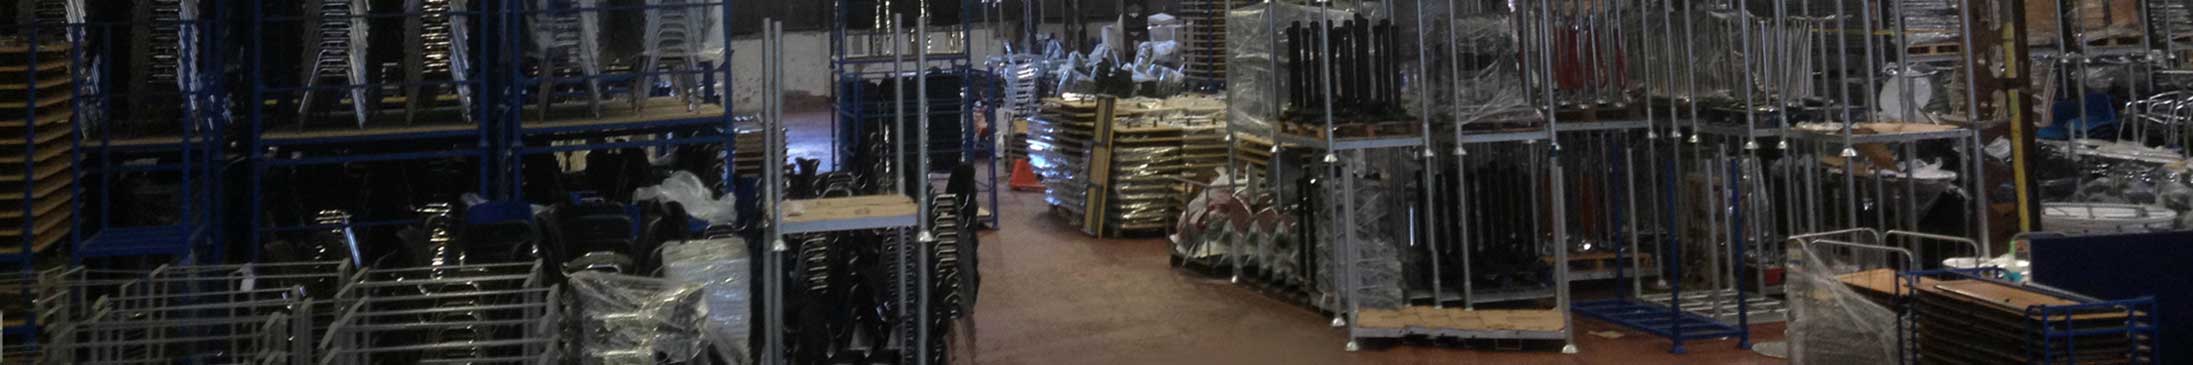 Warehouse General View